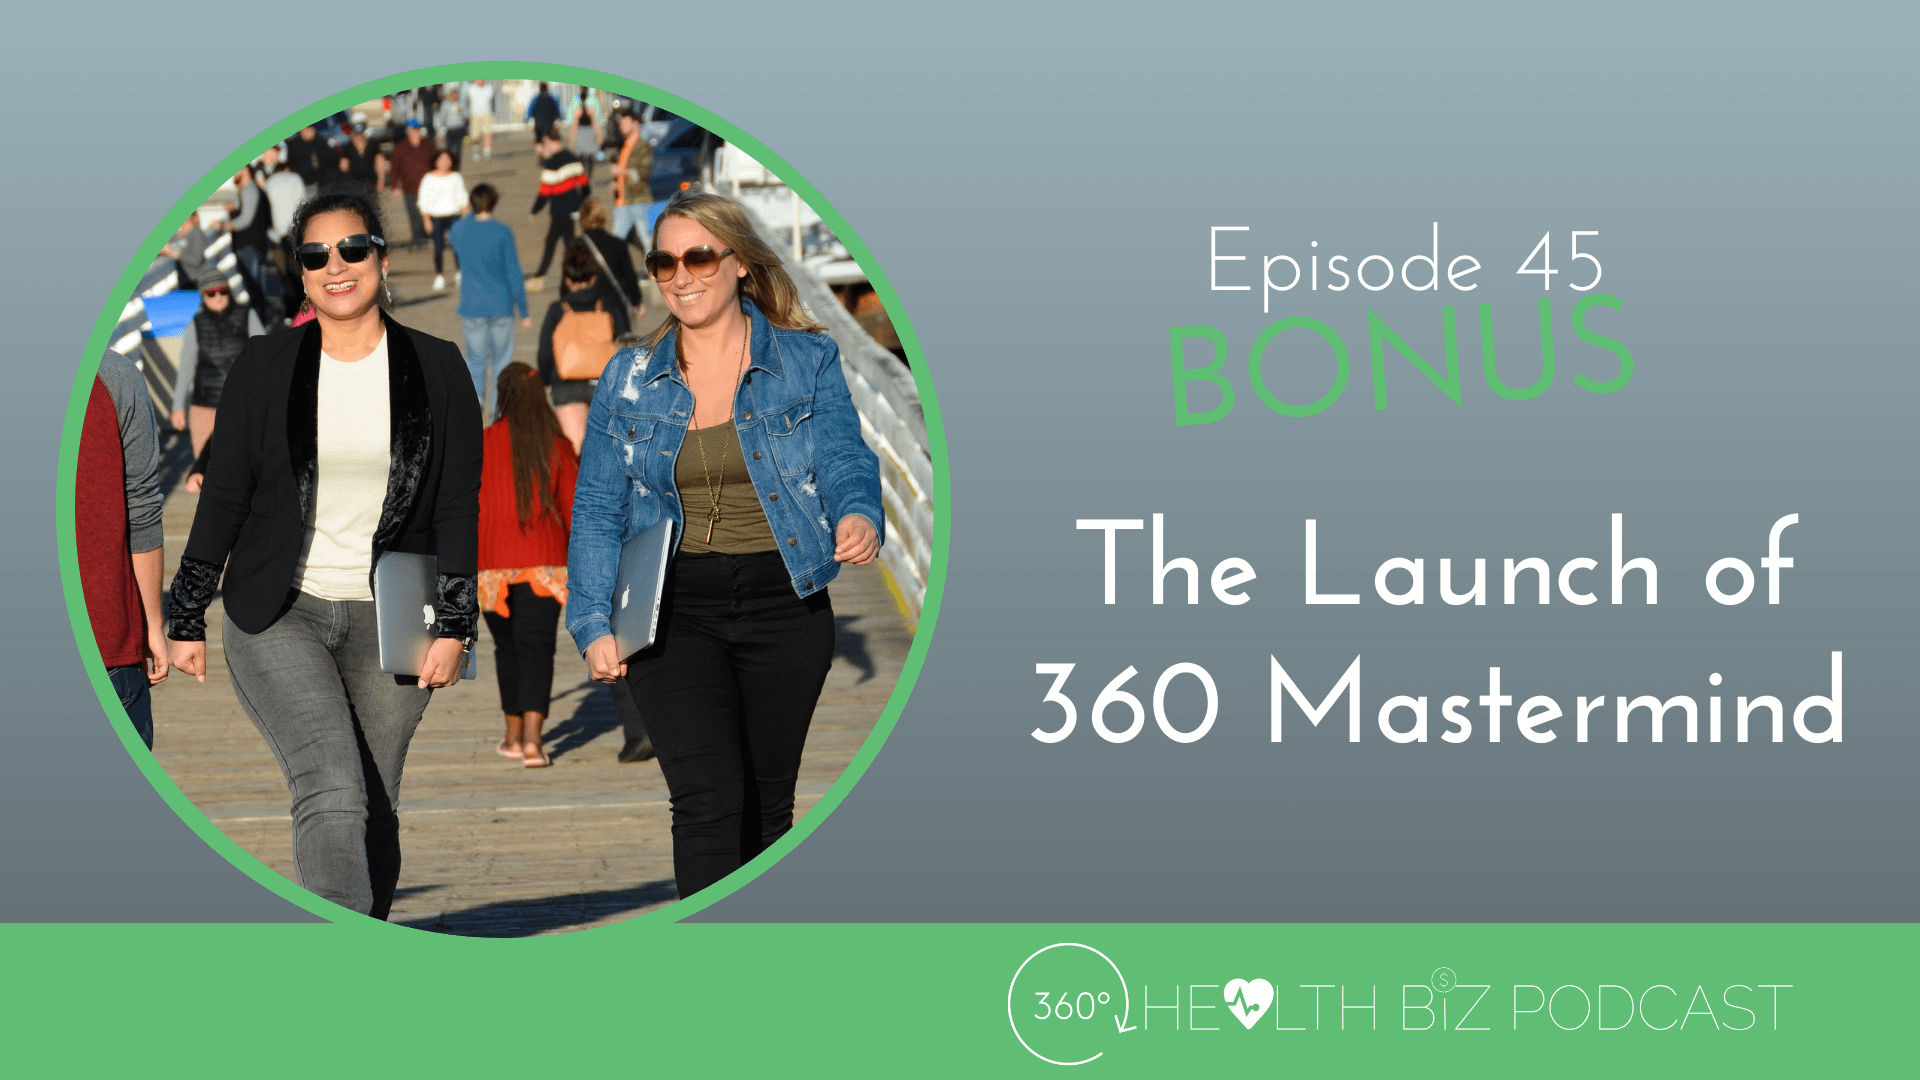 What is a Mastermind Group And Launch of 360 Mastermind